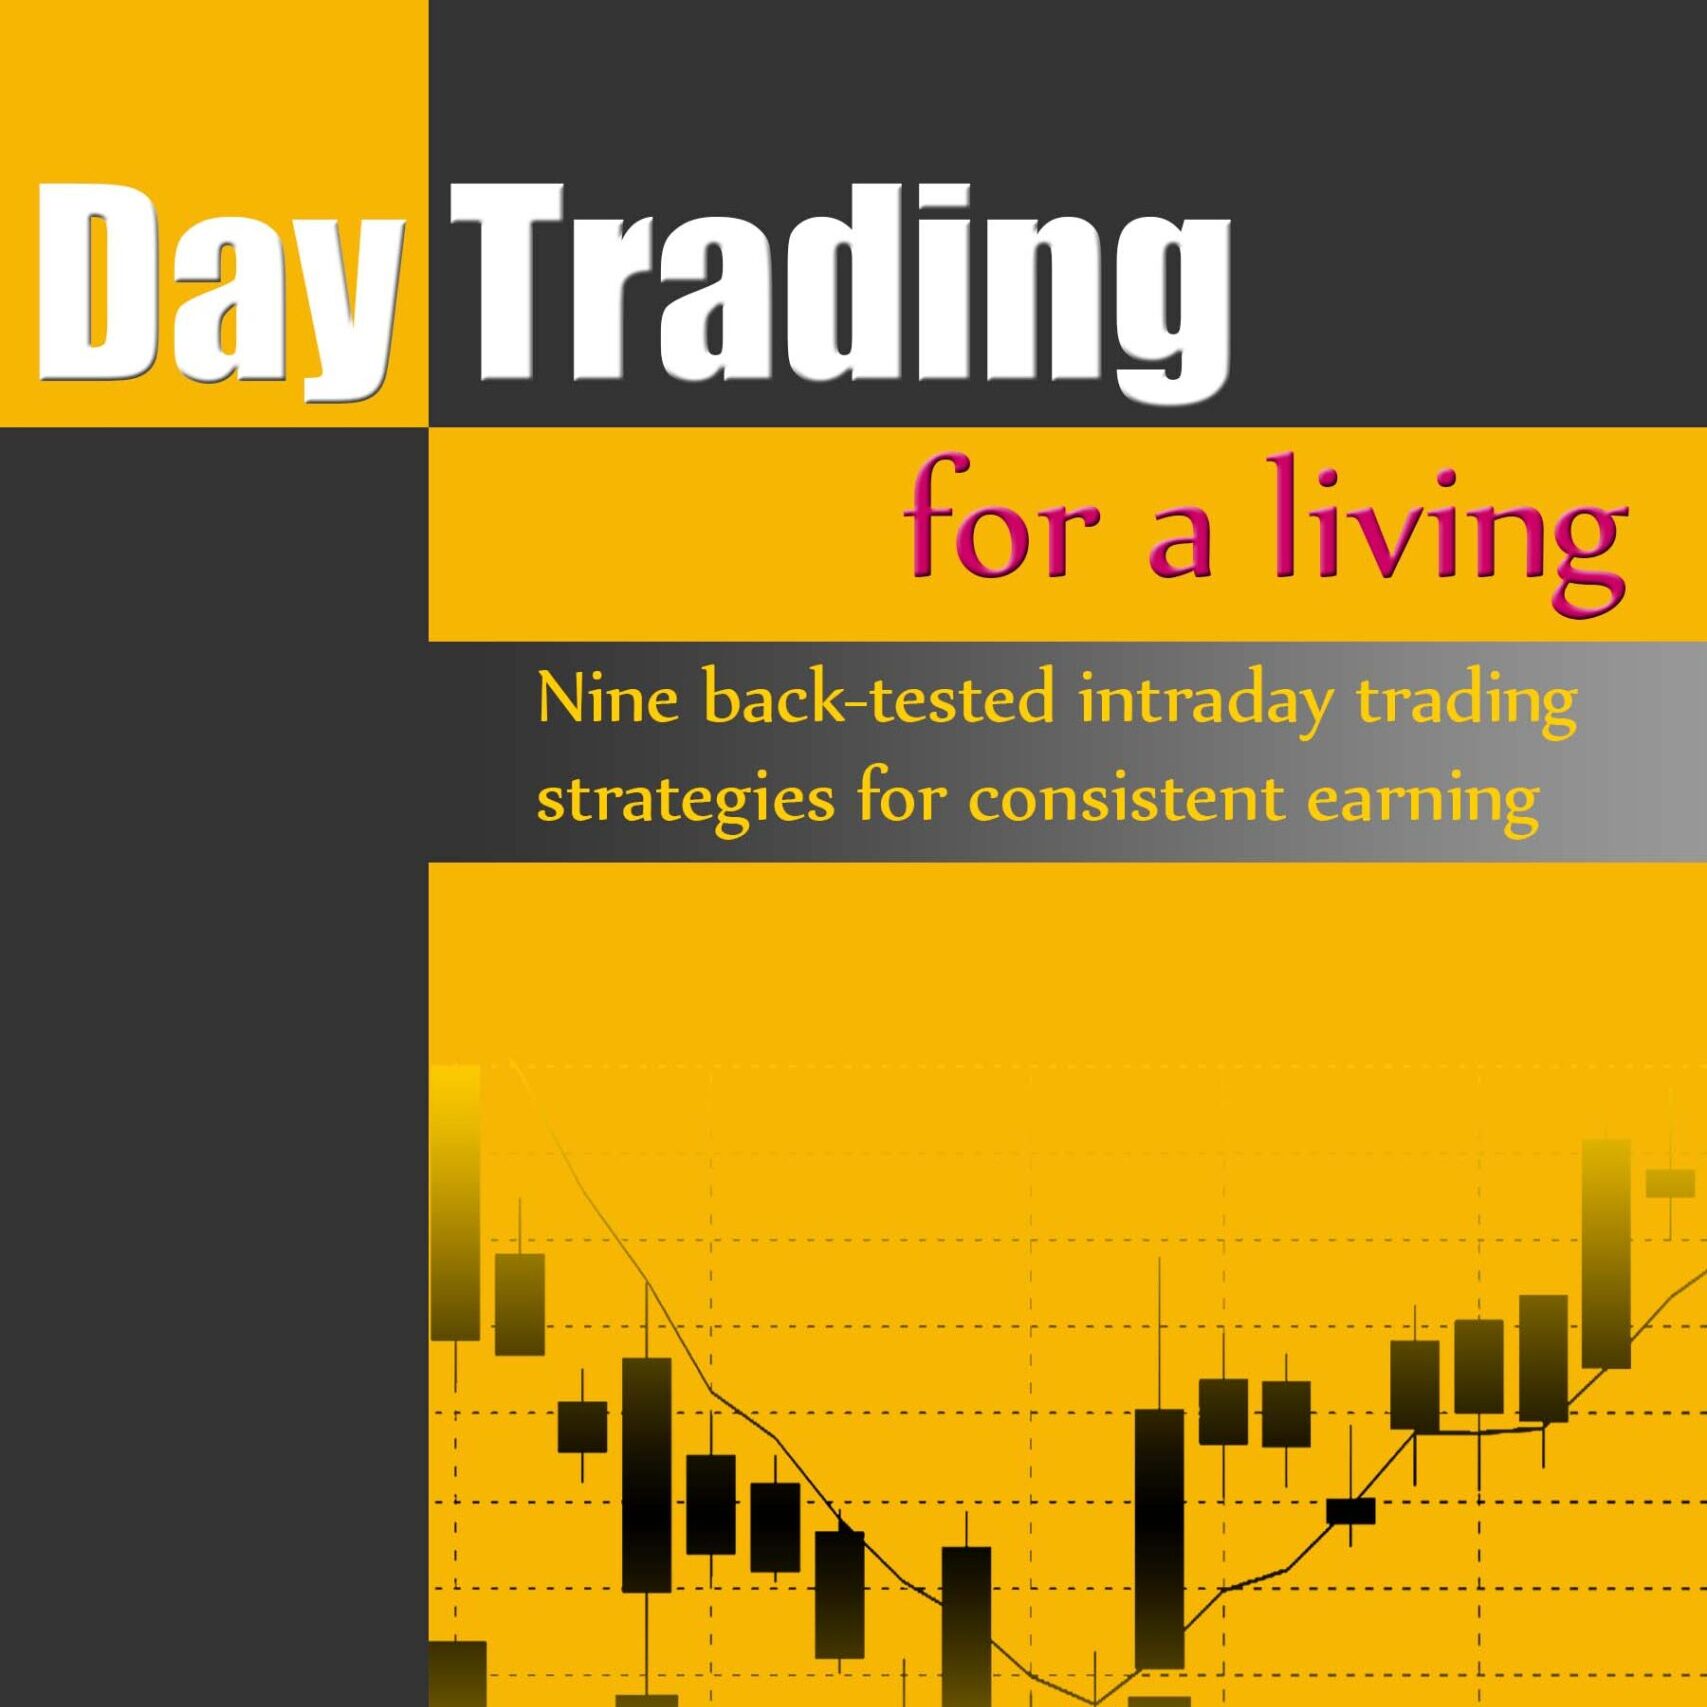 Day trading for a living